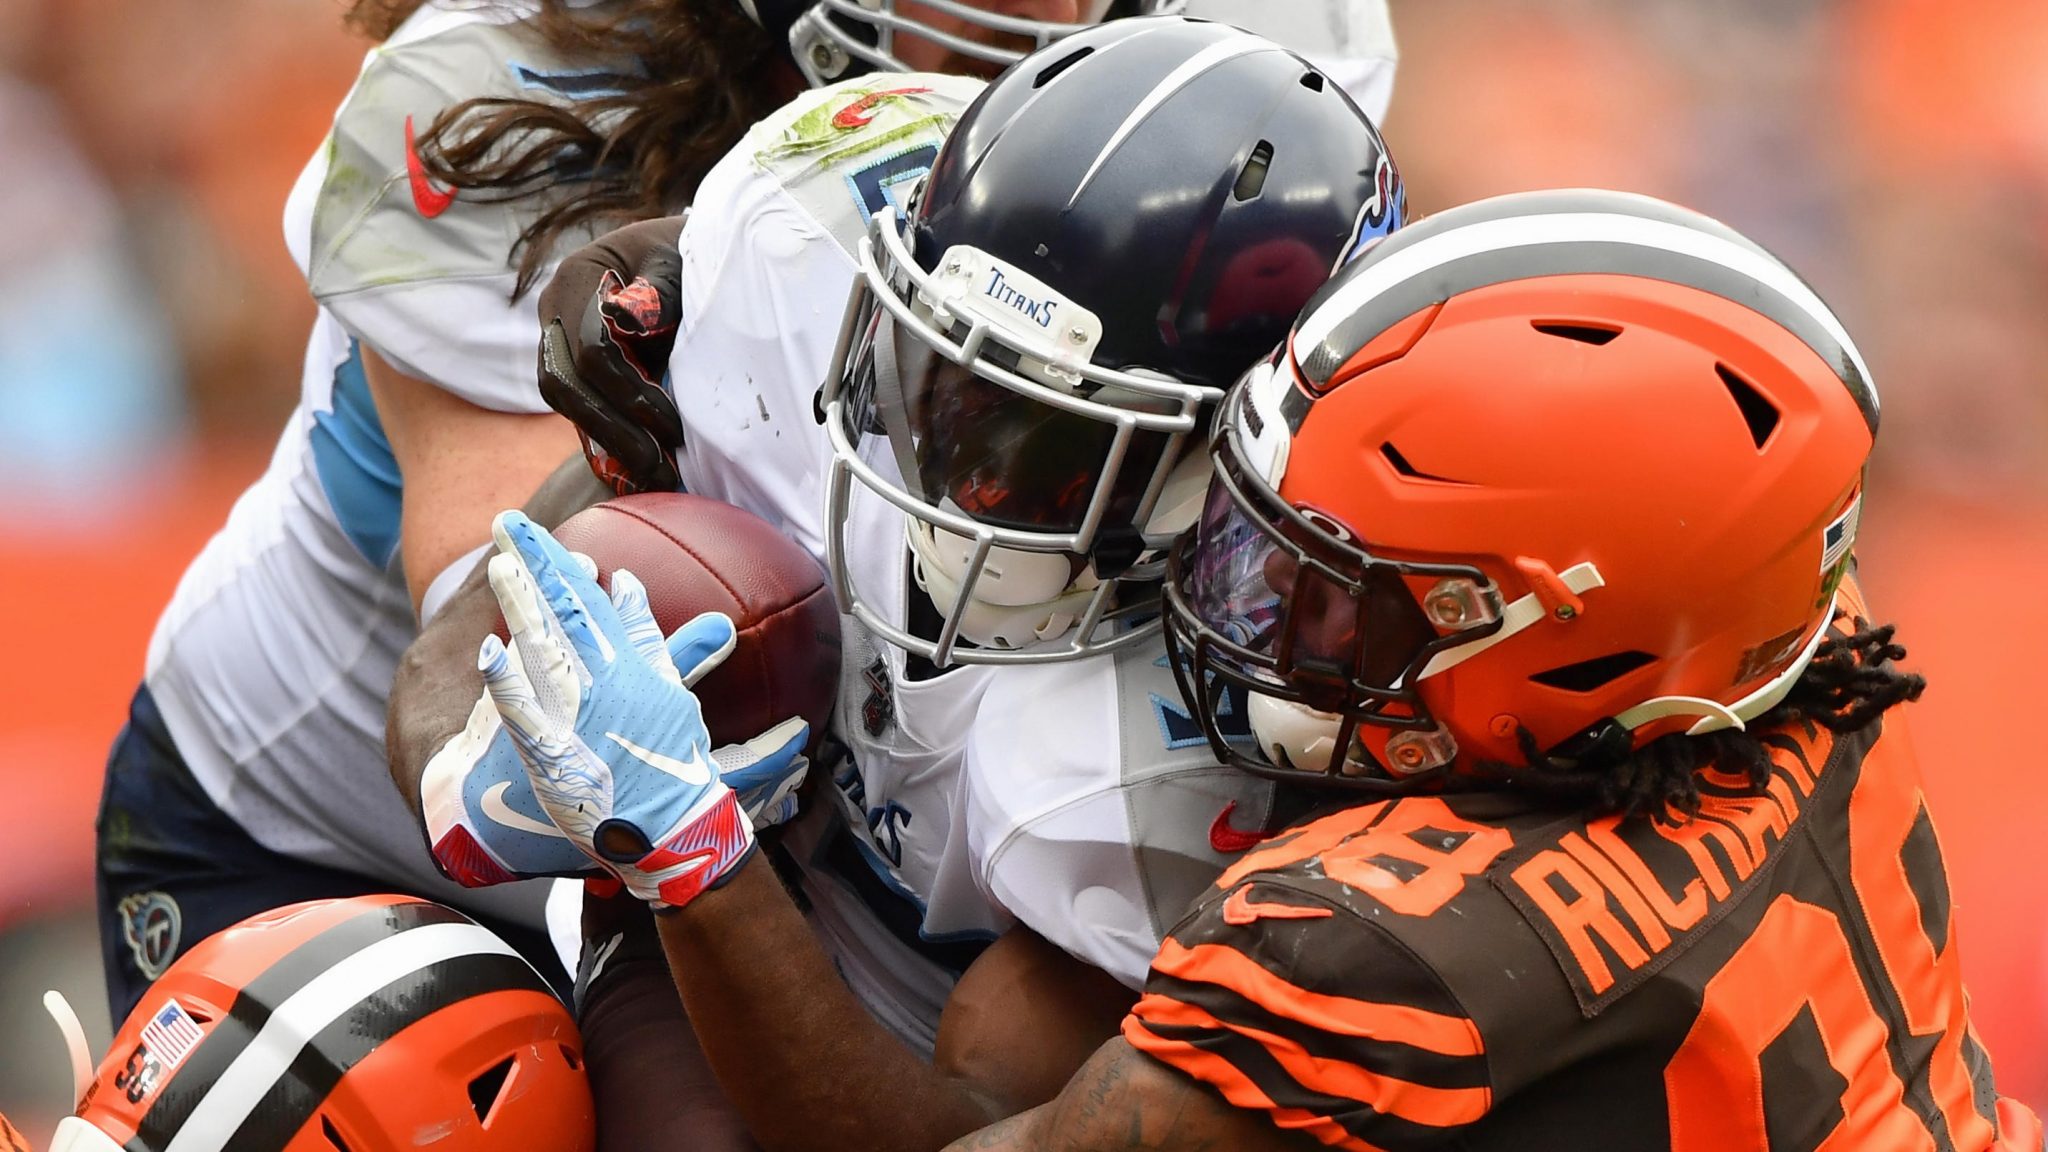 Browns vs Titans live stream how to watch the NFL week 13 game from